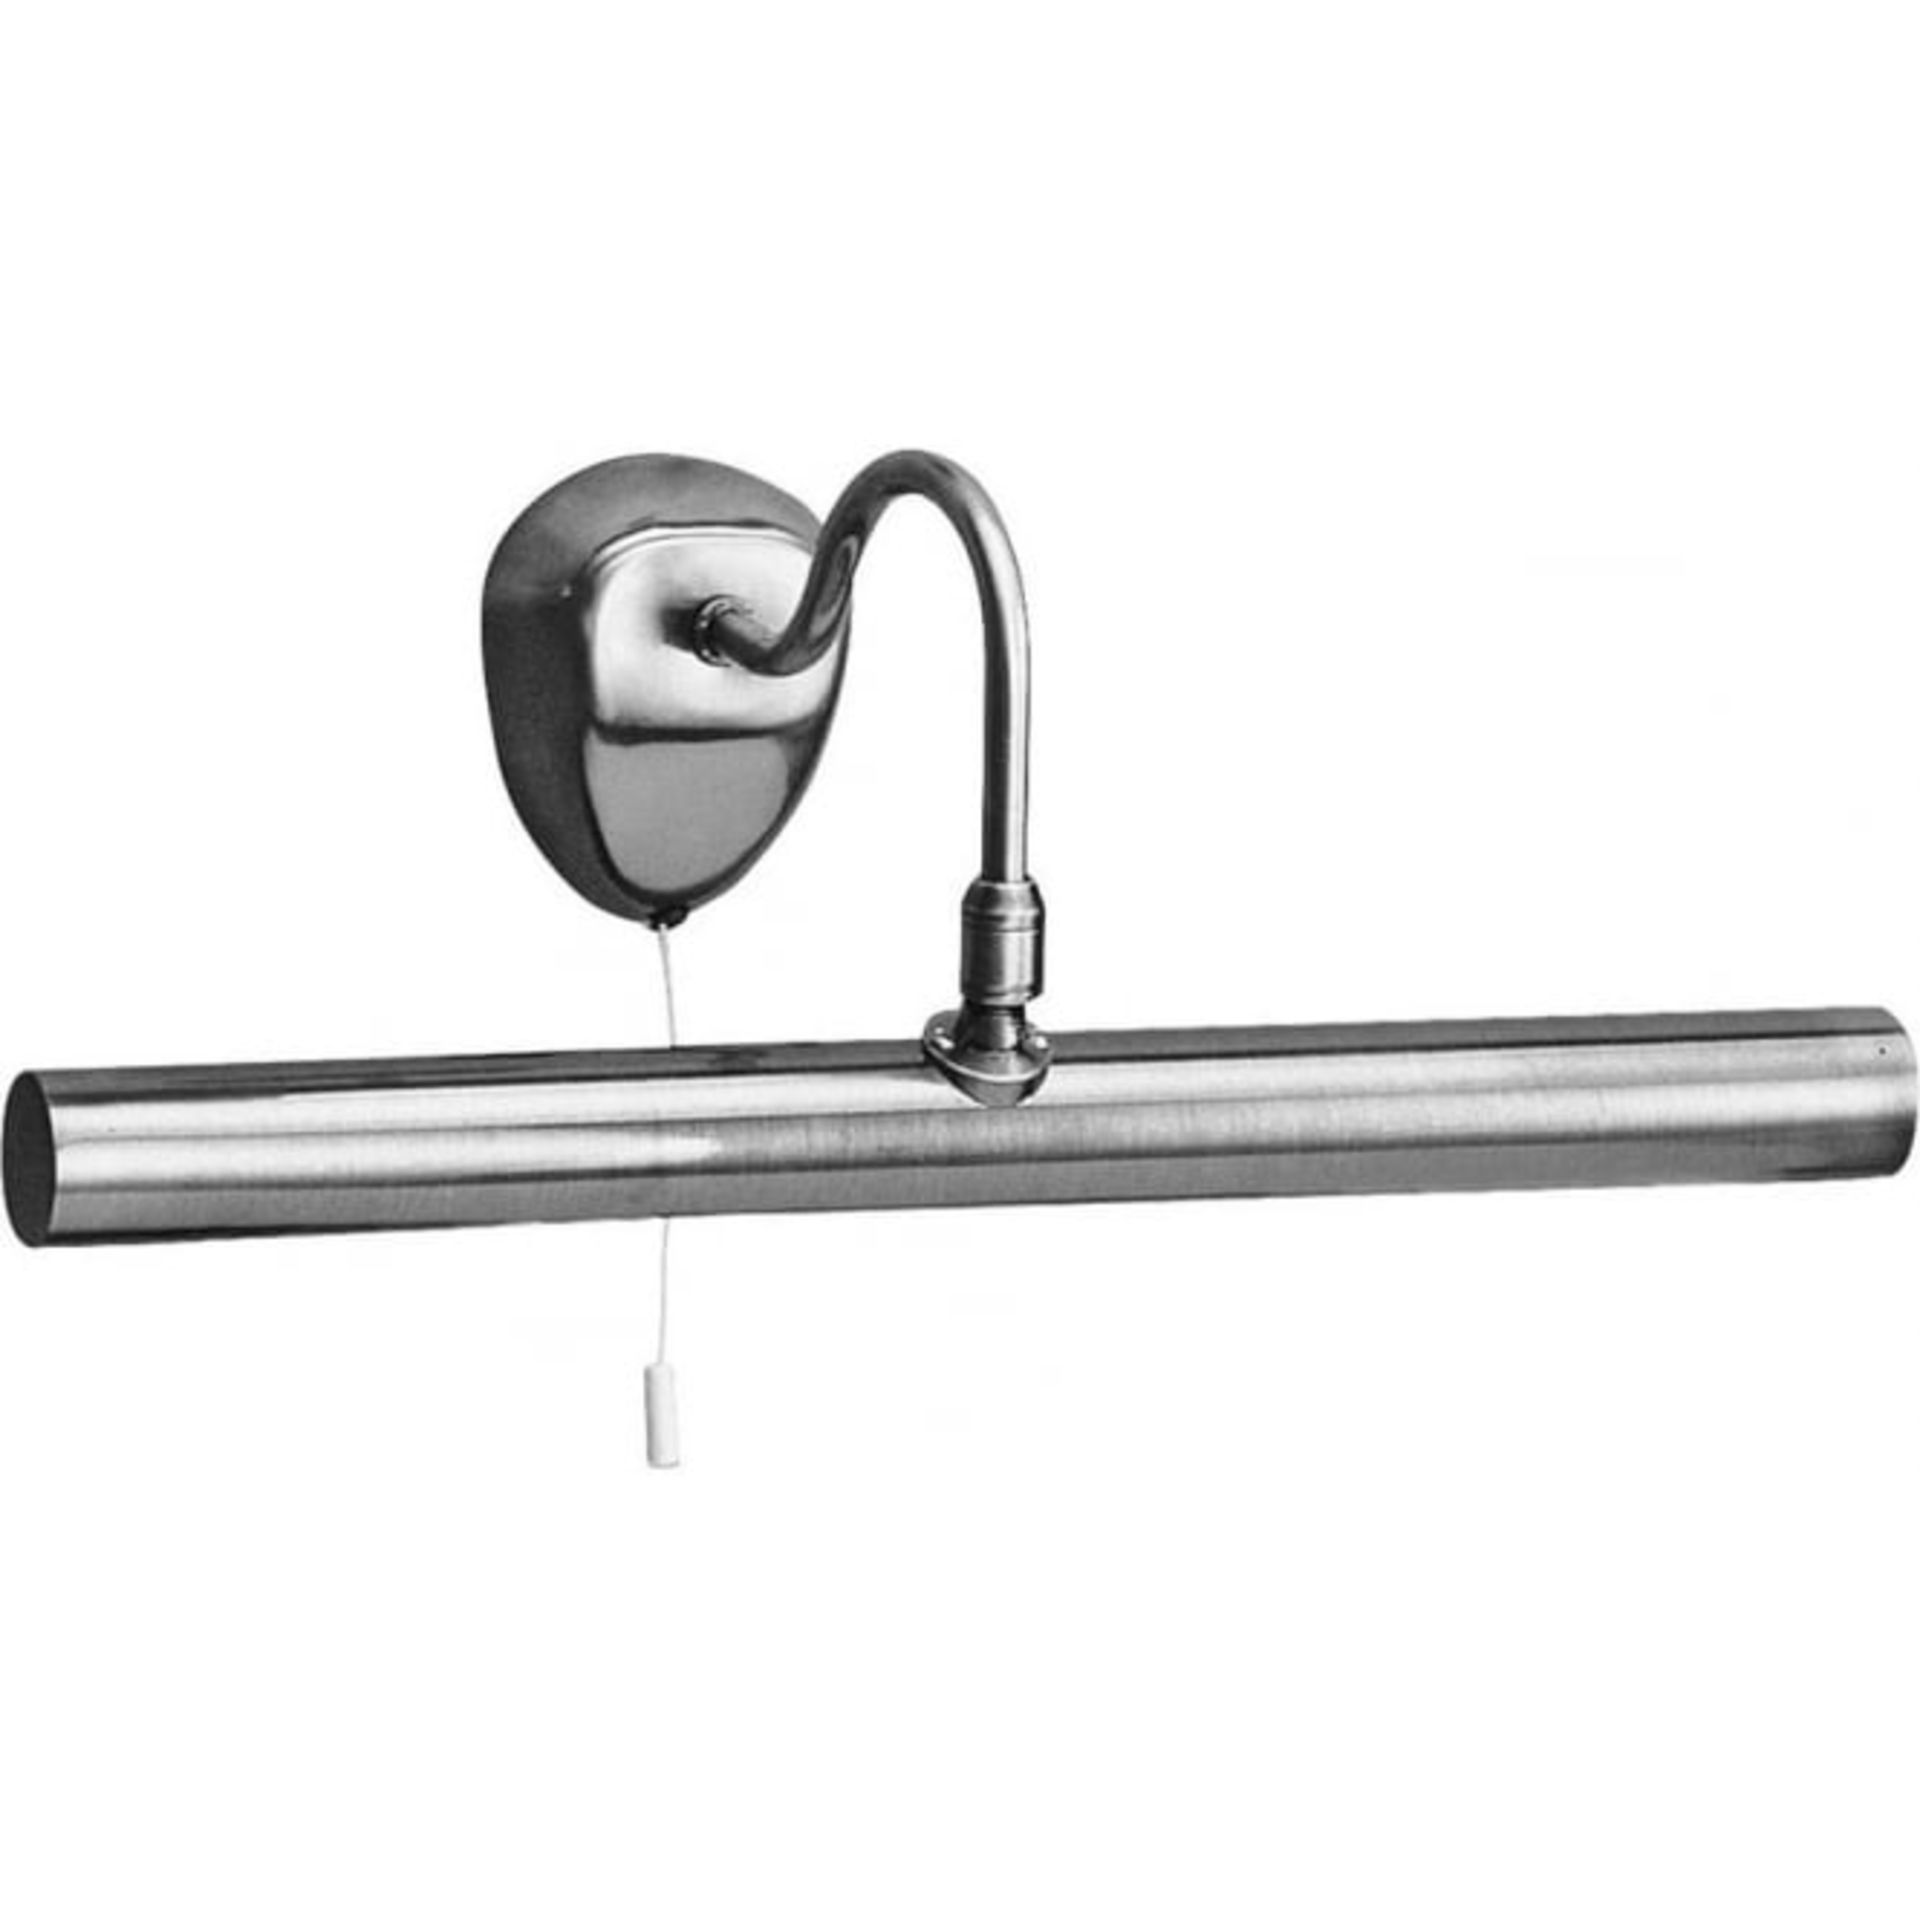 3 x Searchlight Gallery Picture Lights With Satin Chrome Finish, Adjustable Heads and On/Off - Image 4 of 4